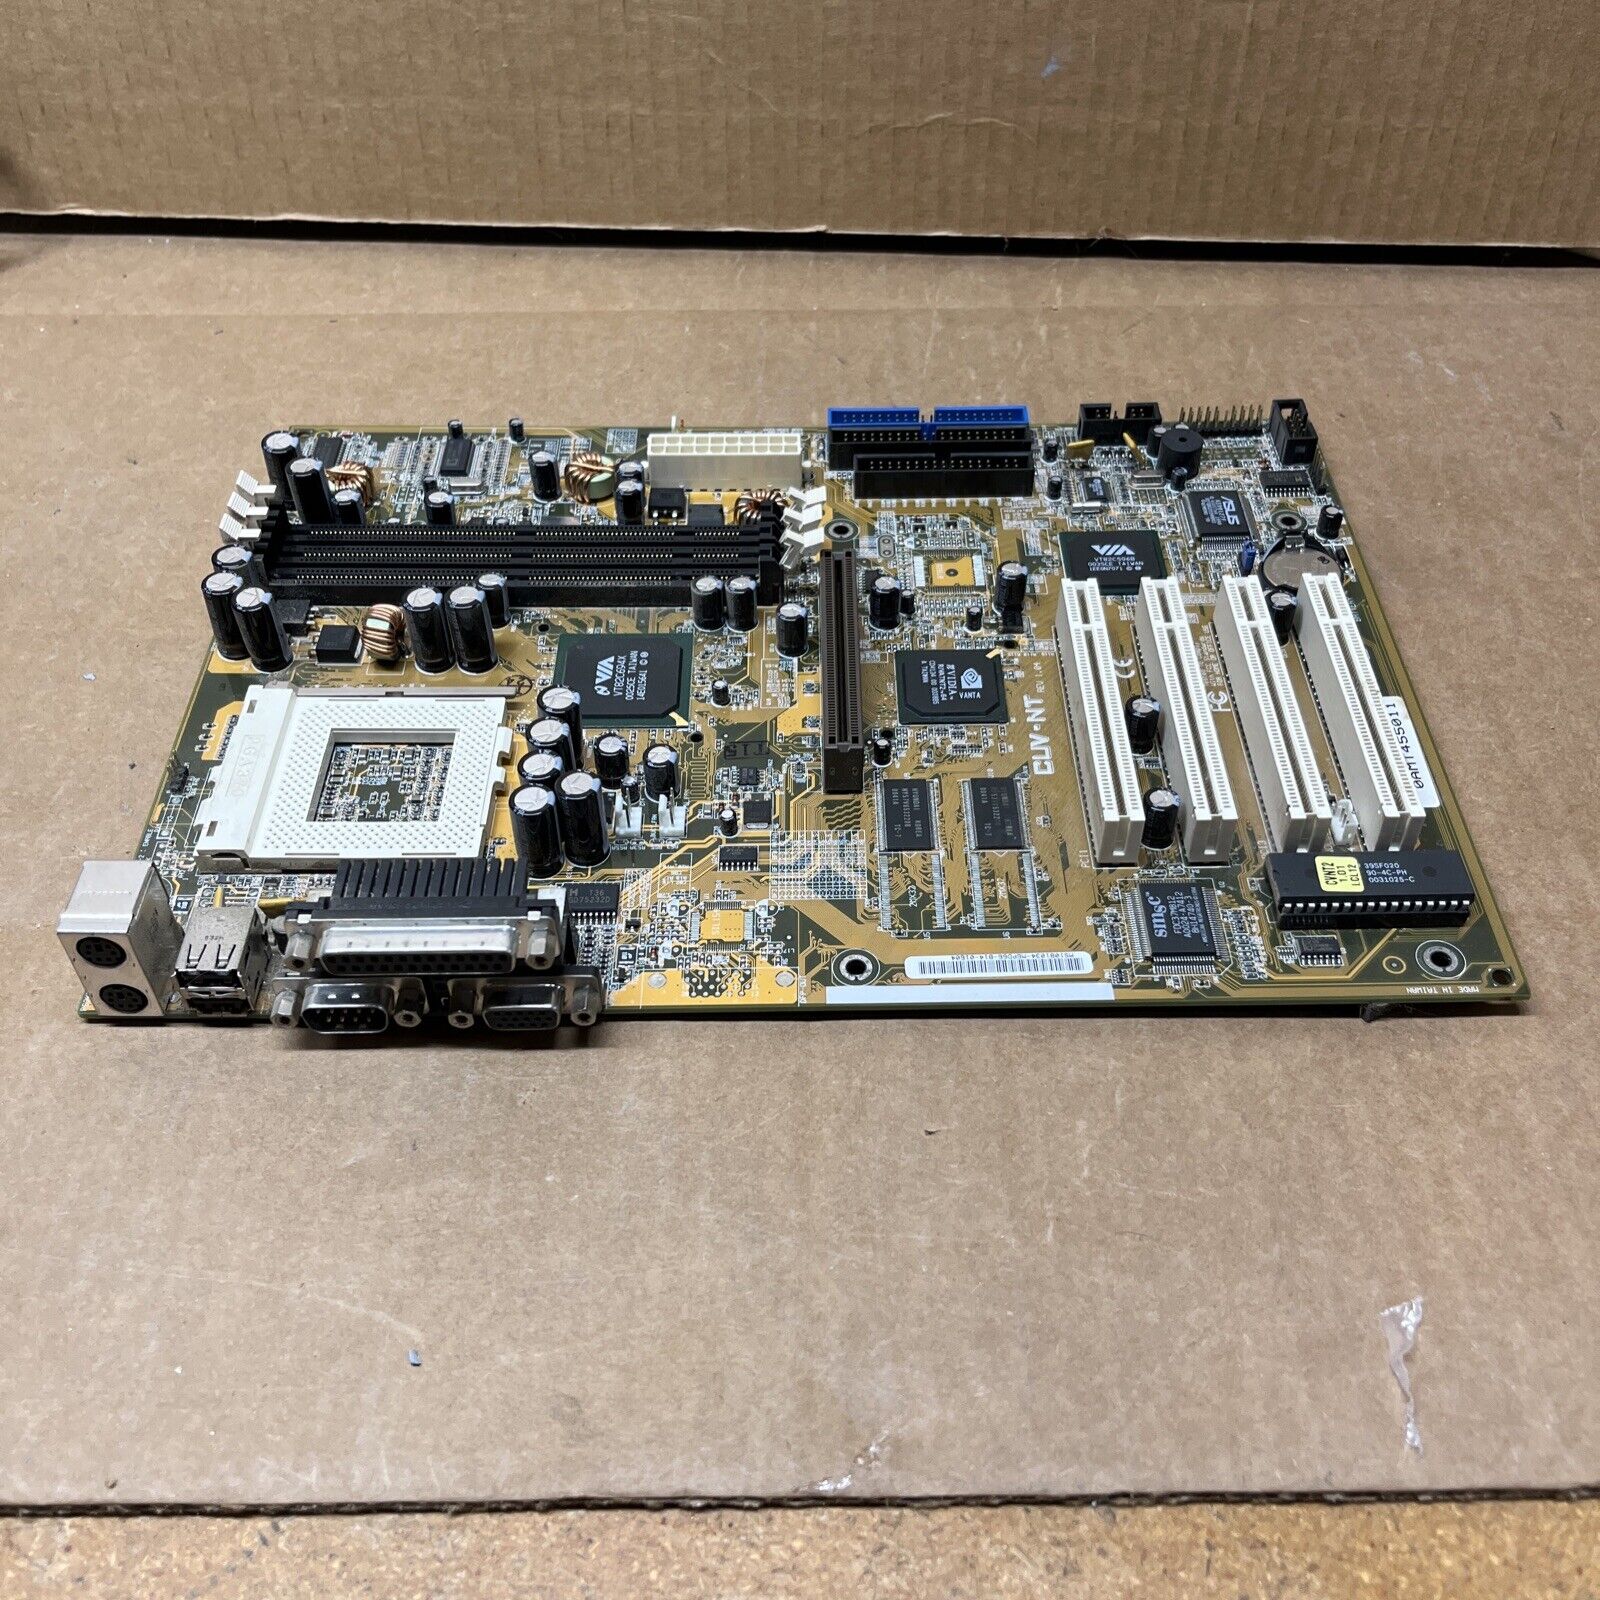 HP CUV-NT 5185-1576 Via 694X Chipset socket 370 supports up to PIII 800 MHz. 3